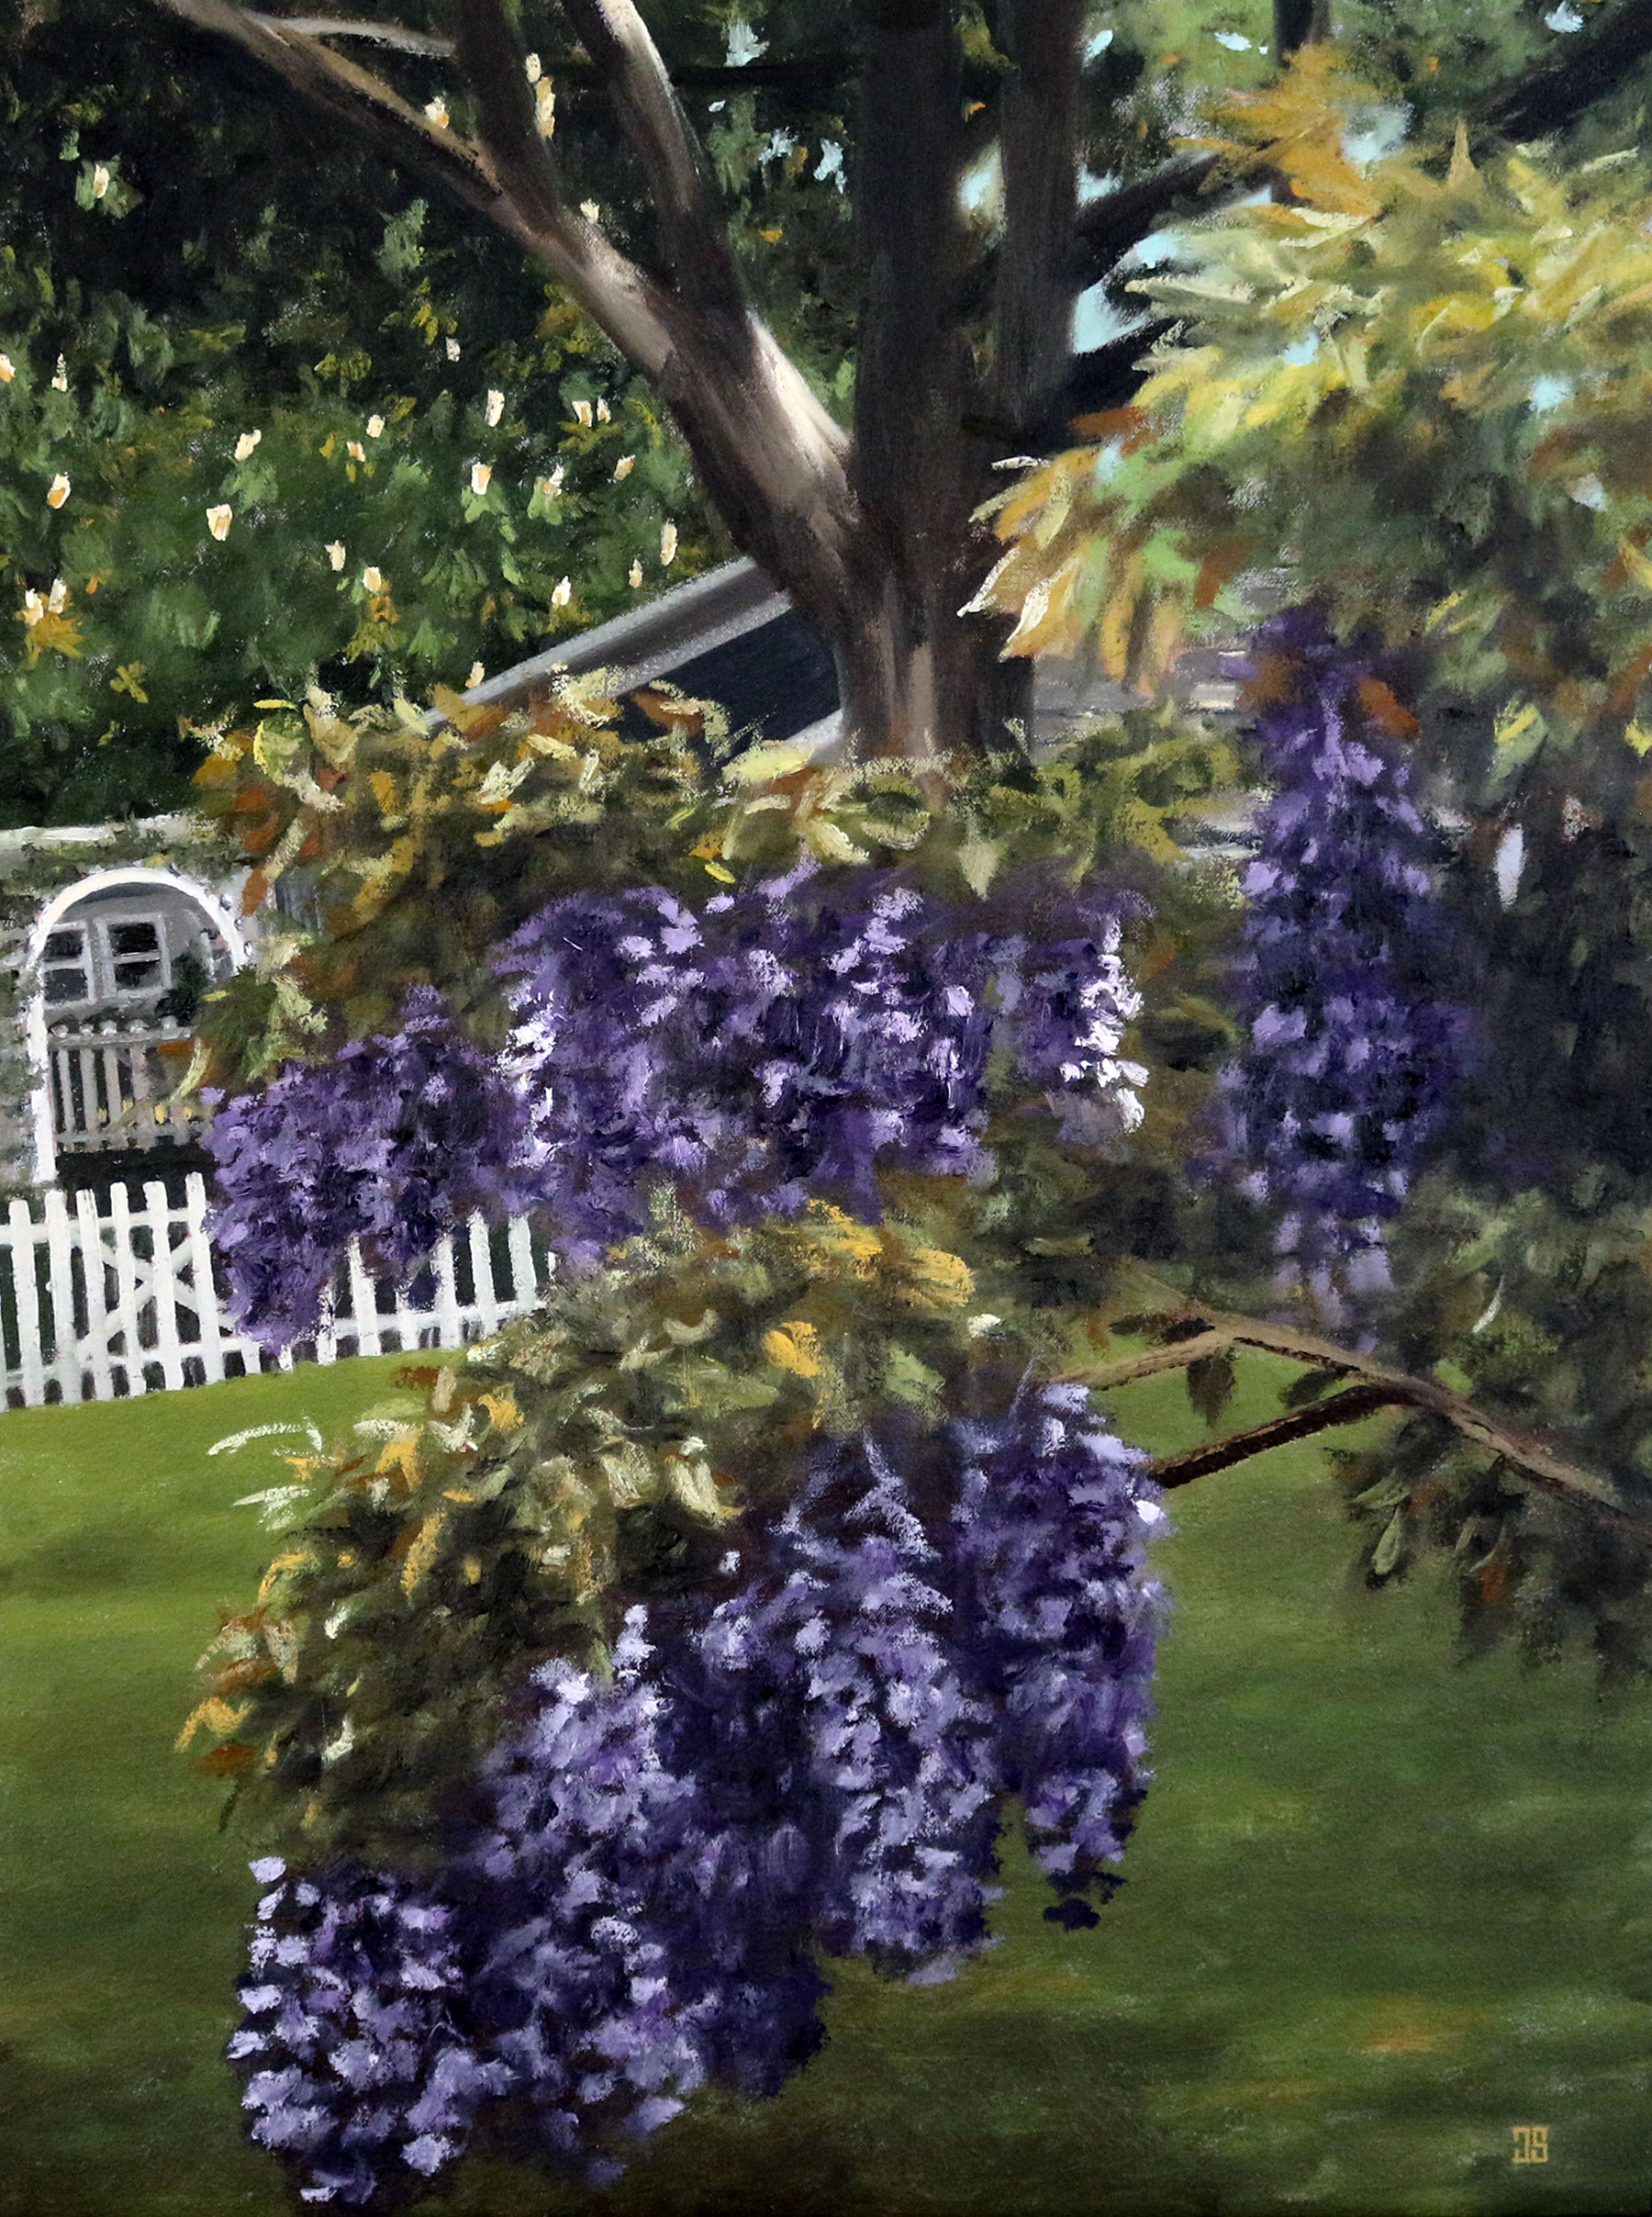 Oil painting "Wisteria in Osterville" by Jeffrey Dale Starr